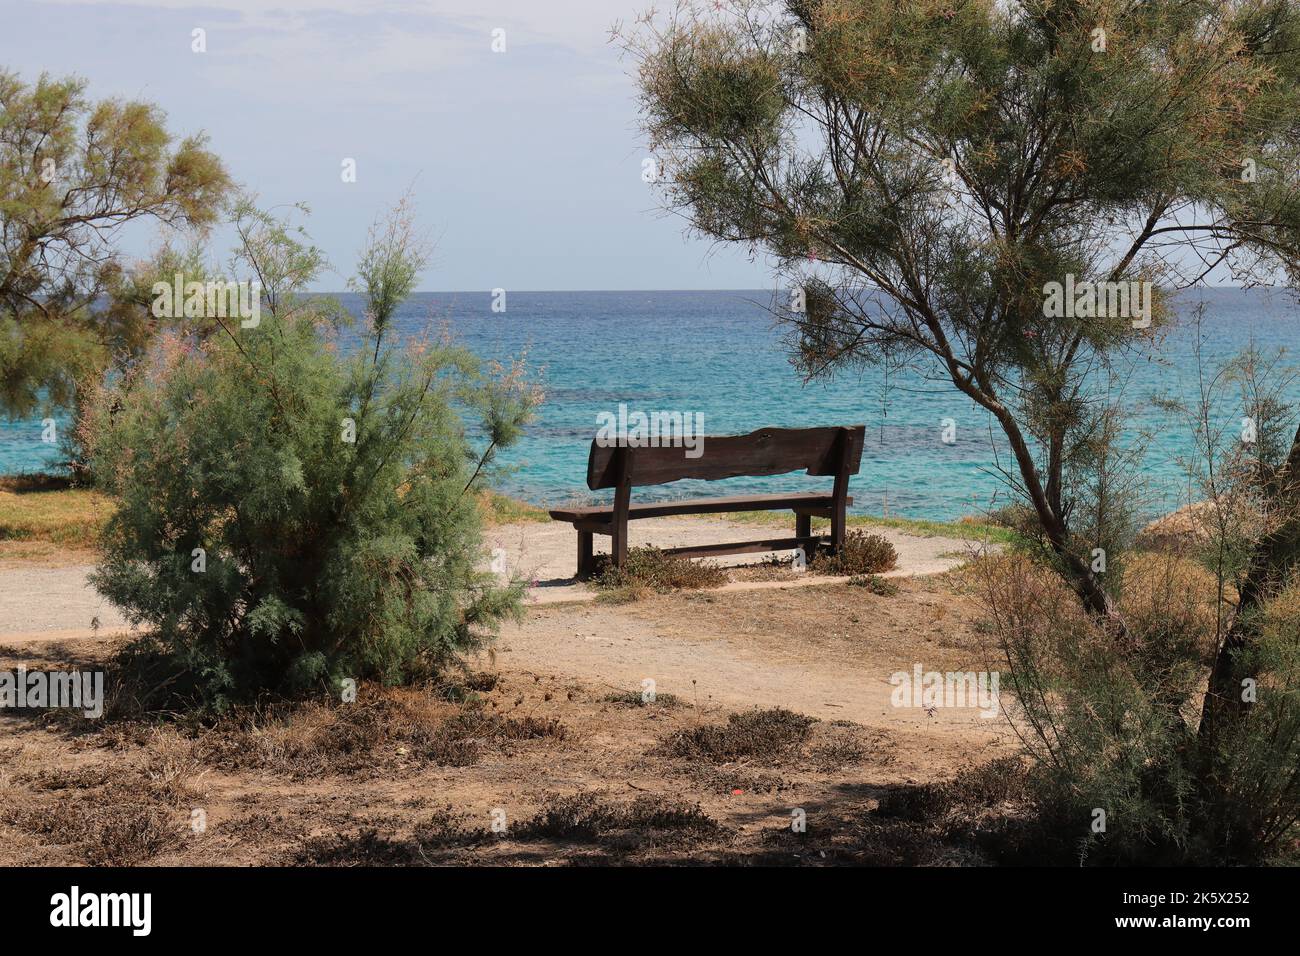 between green plants there is a small wooden bench on a beach promenade, which offers a beautiful view of the wide sea Stock Photo